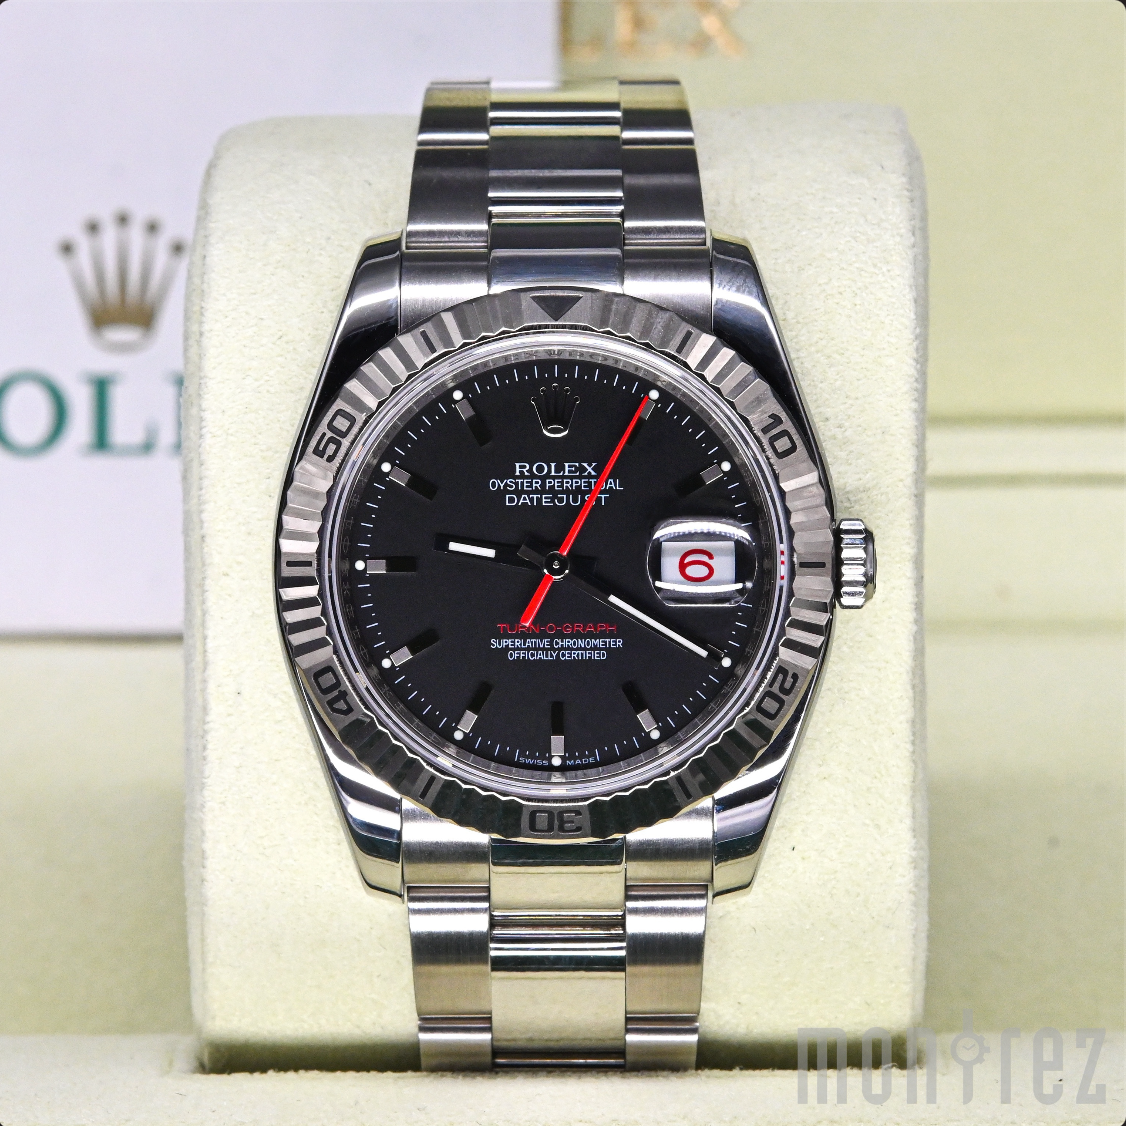 [Pre-Owned Watch] Rolex Datejust Turn-O-Graph 36mm 116264 Black Index Dial (Oyster Bracelet) (Out of Production)